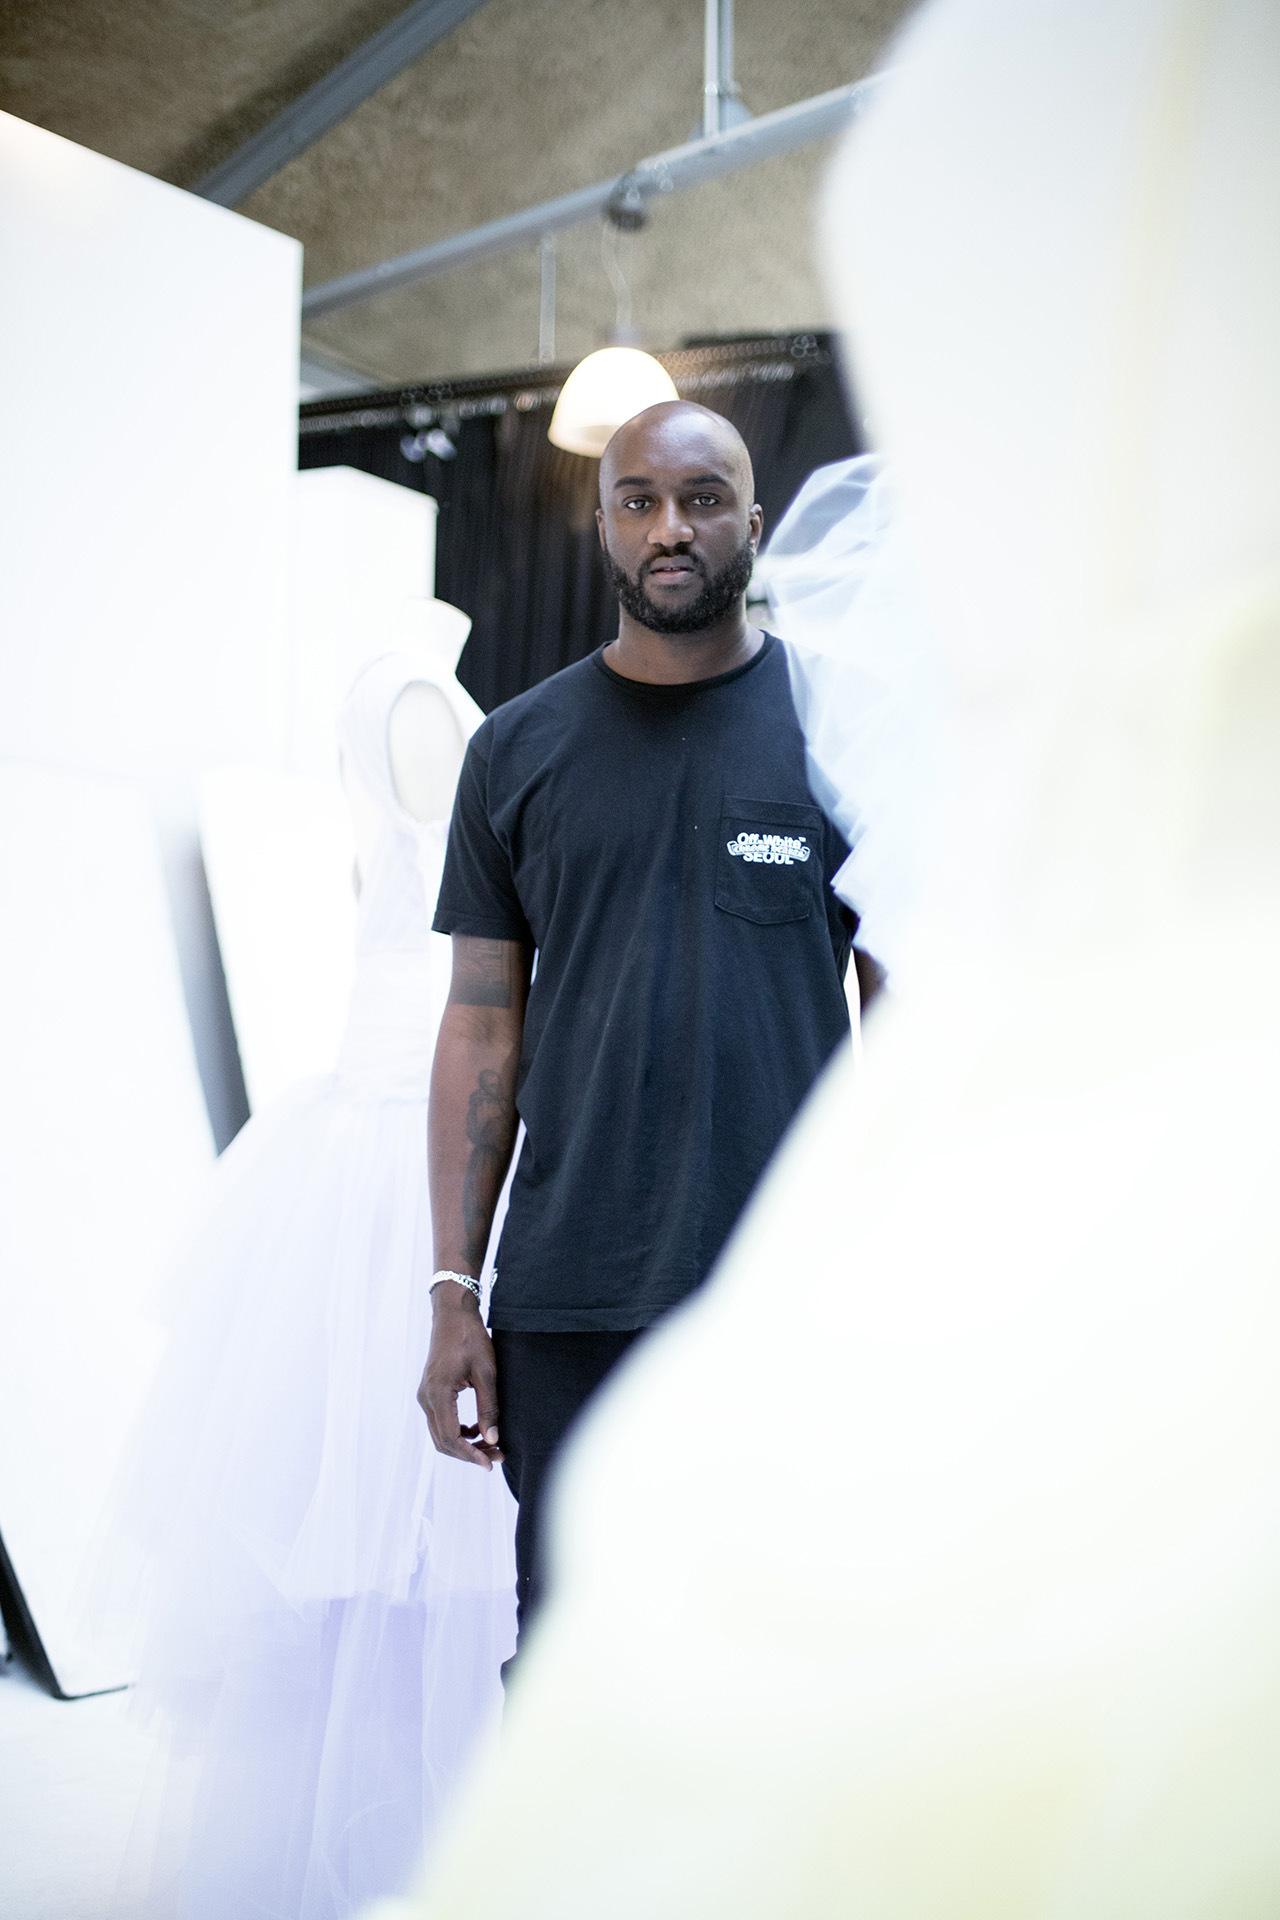 Kanye West's creative director Virgil Abloh launches streetwear